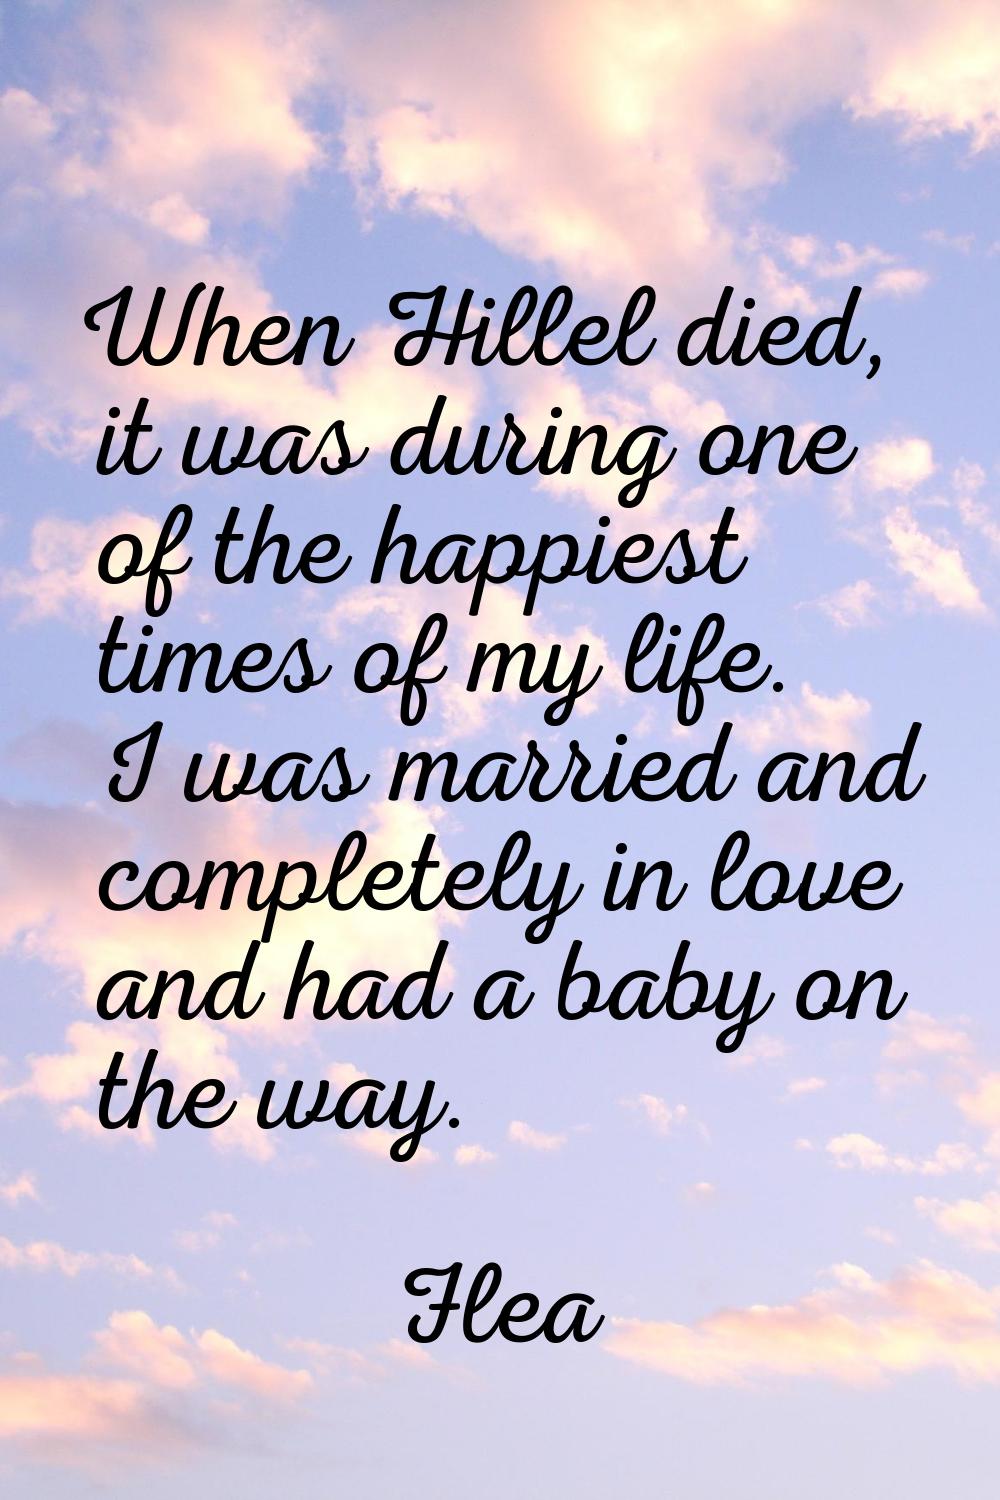 When Hillel died, it was during one of the happiest times of my life. I was married and completely 